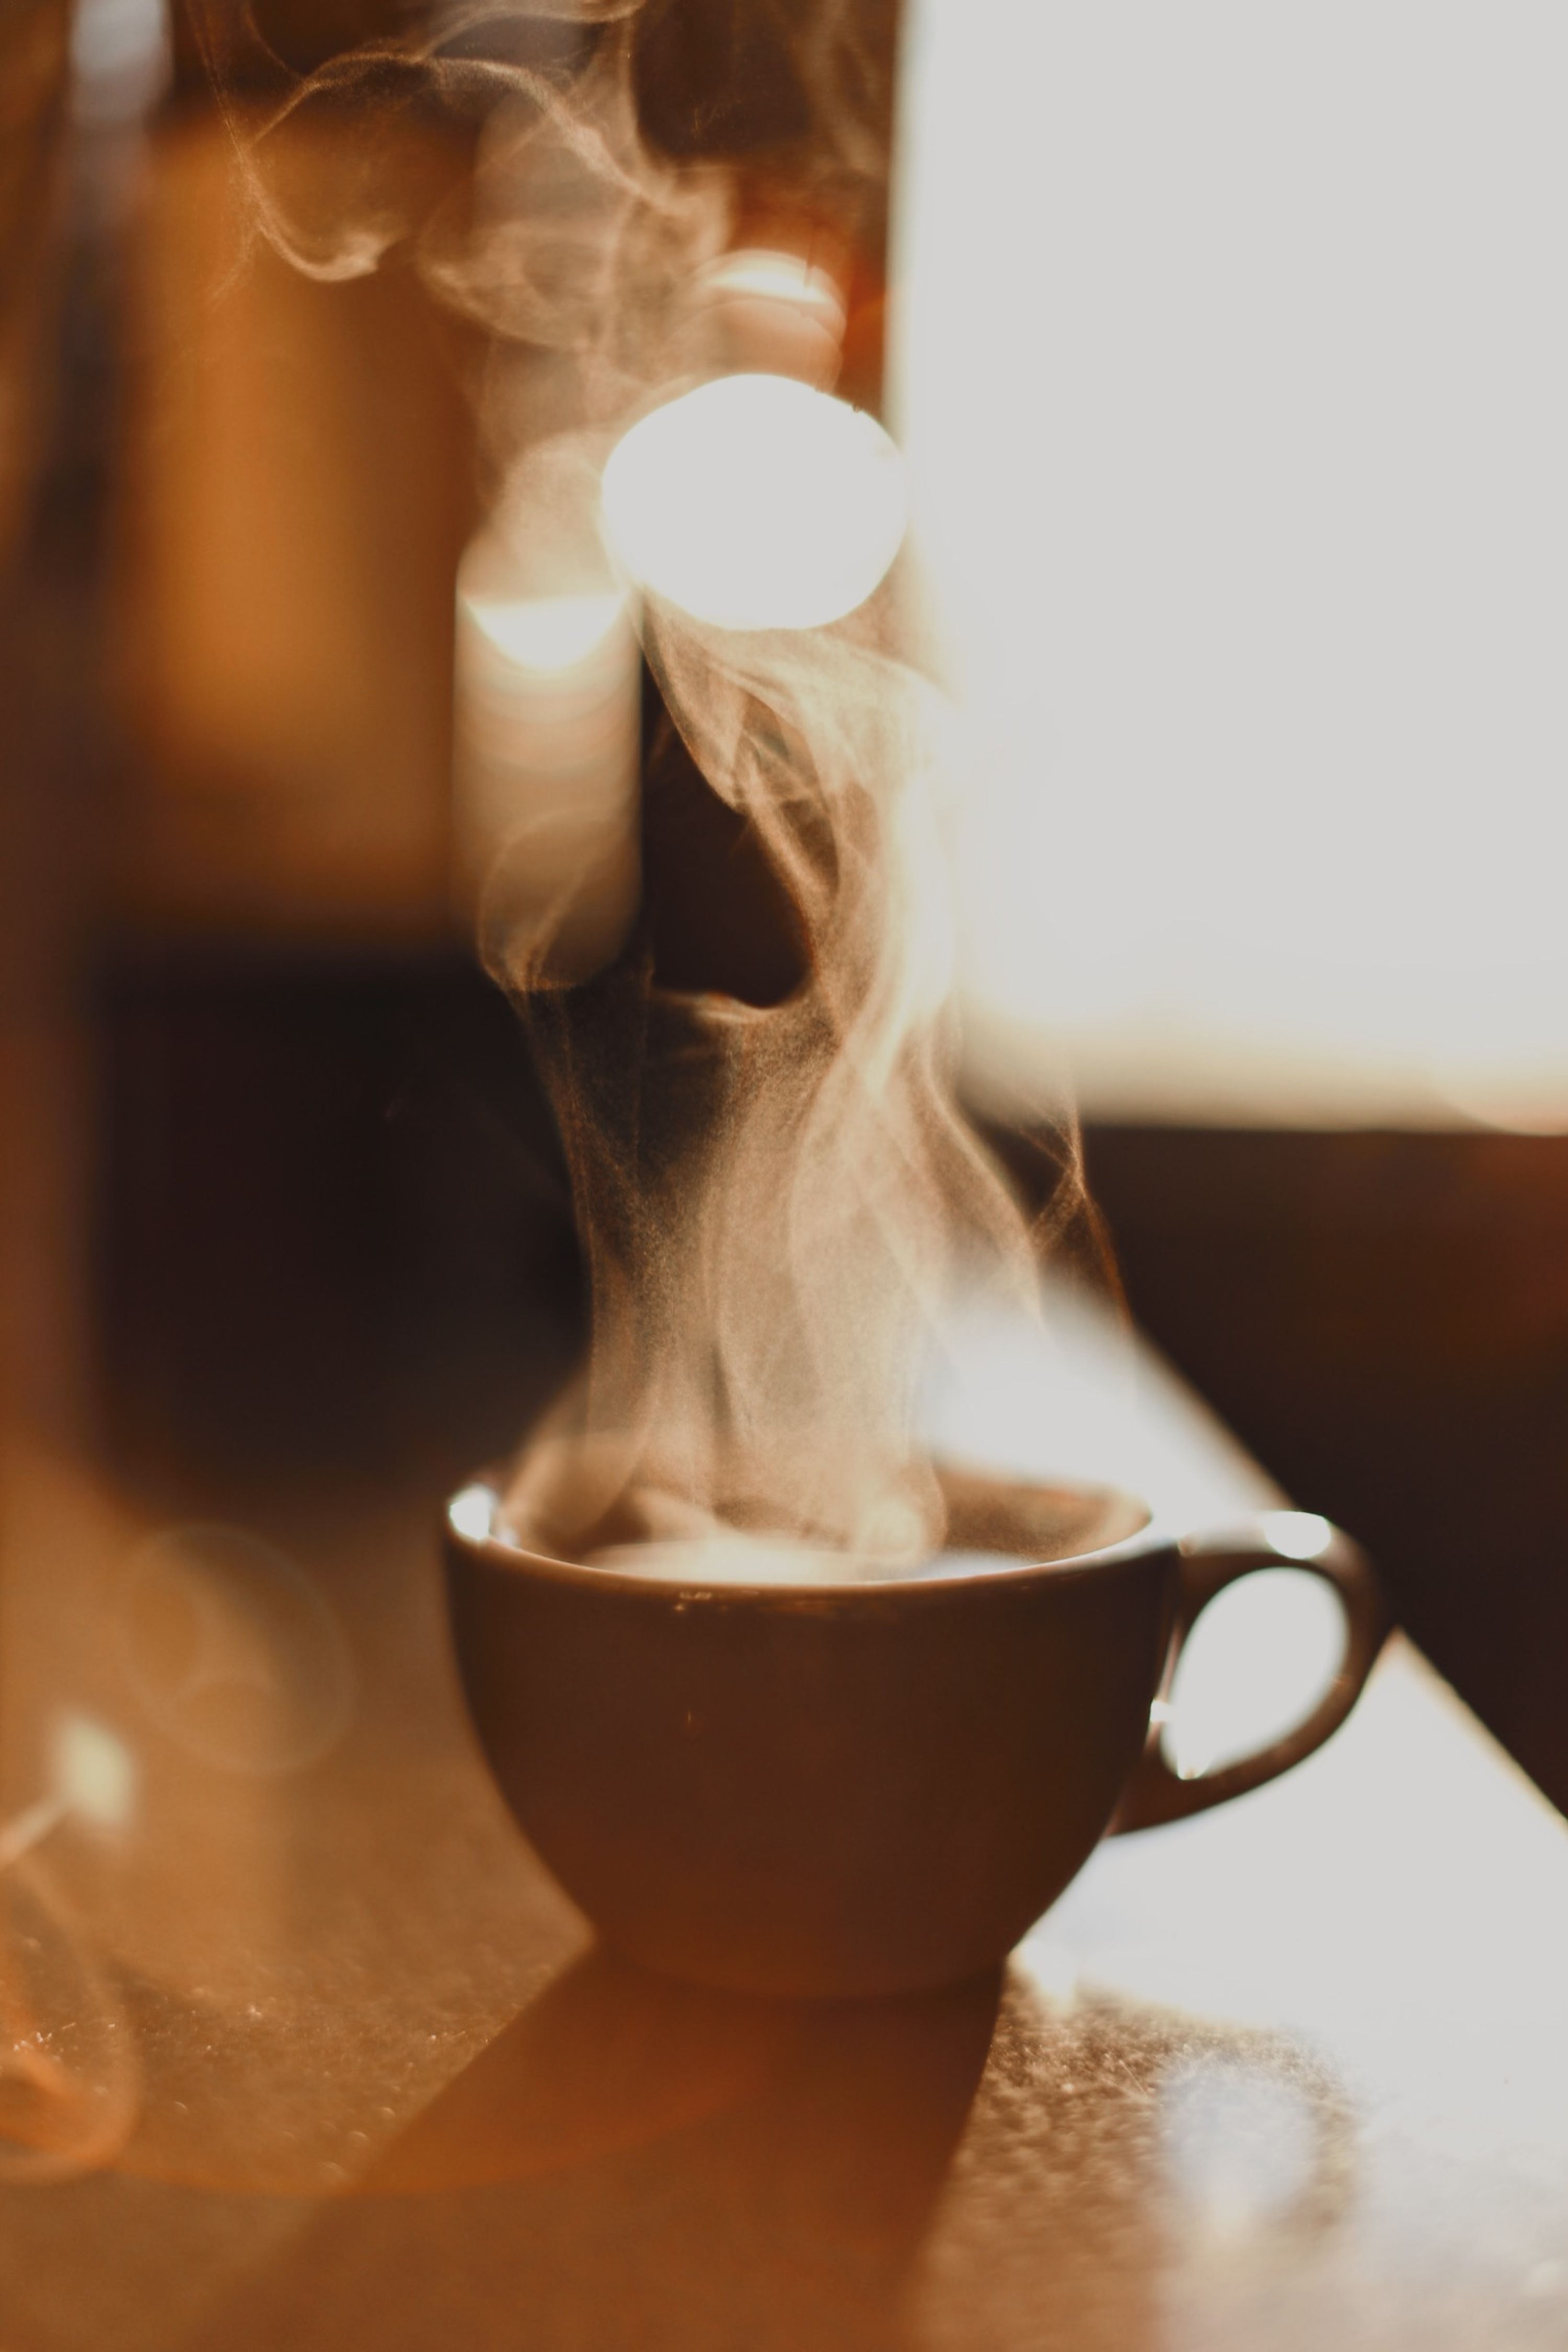 miscellanea, miscellaneous, cup, drink, beverage, steam, hot